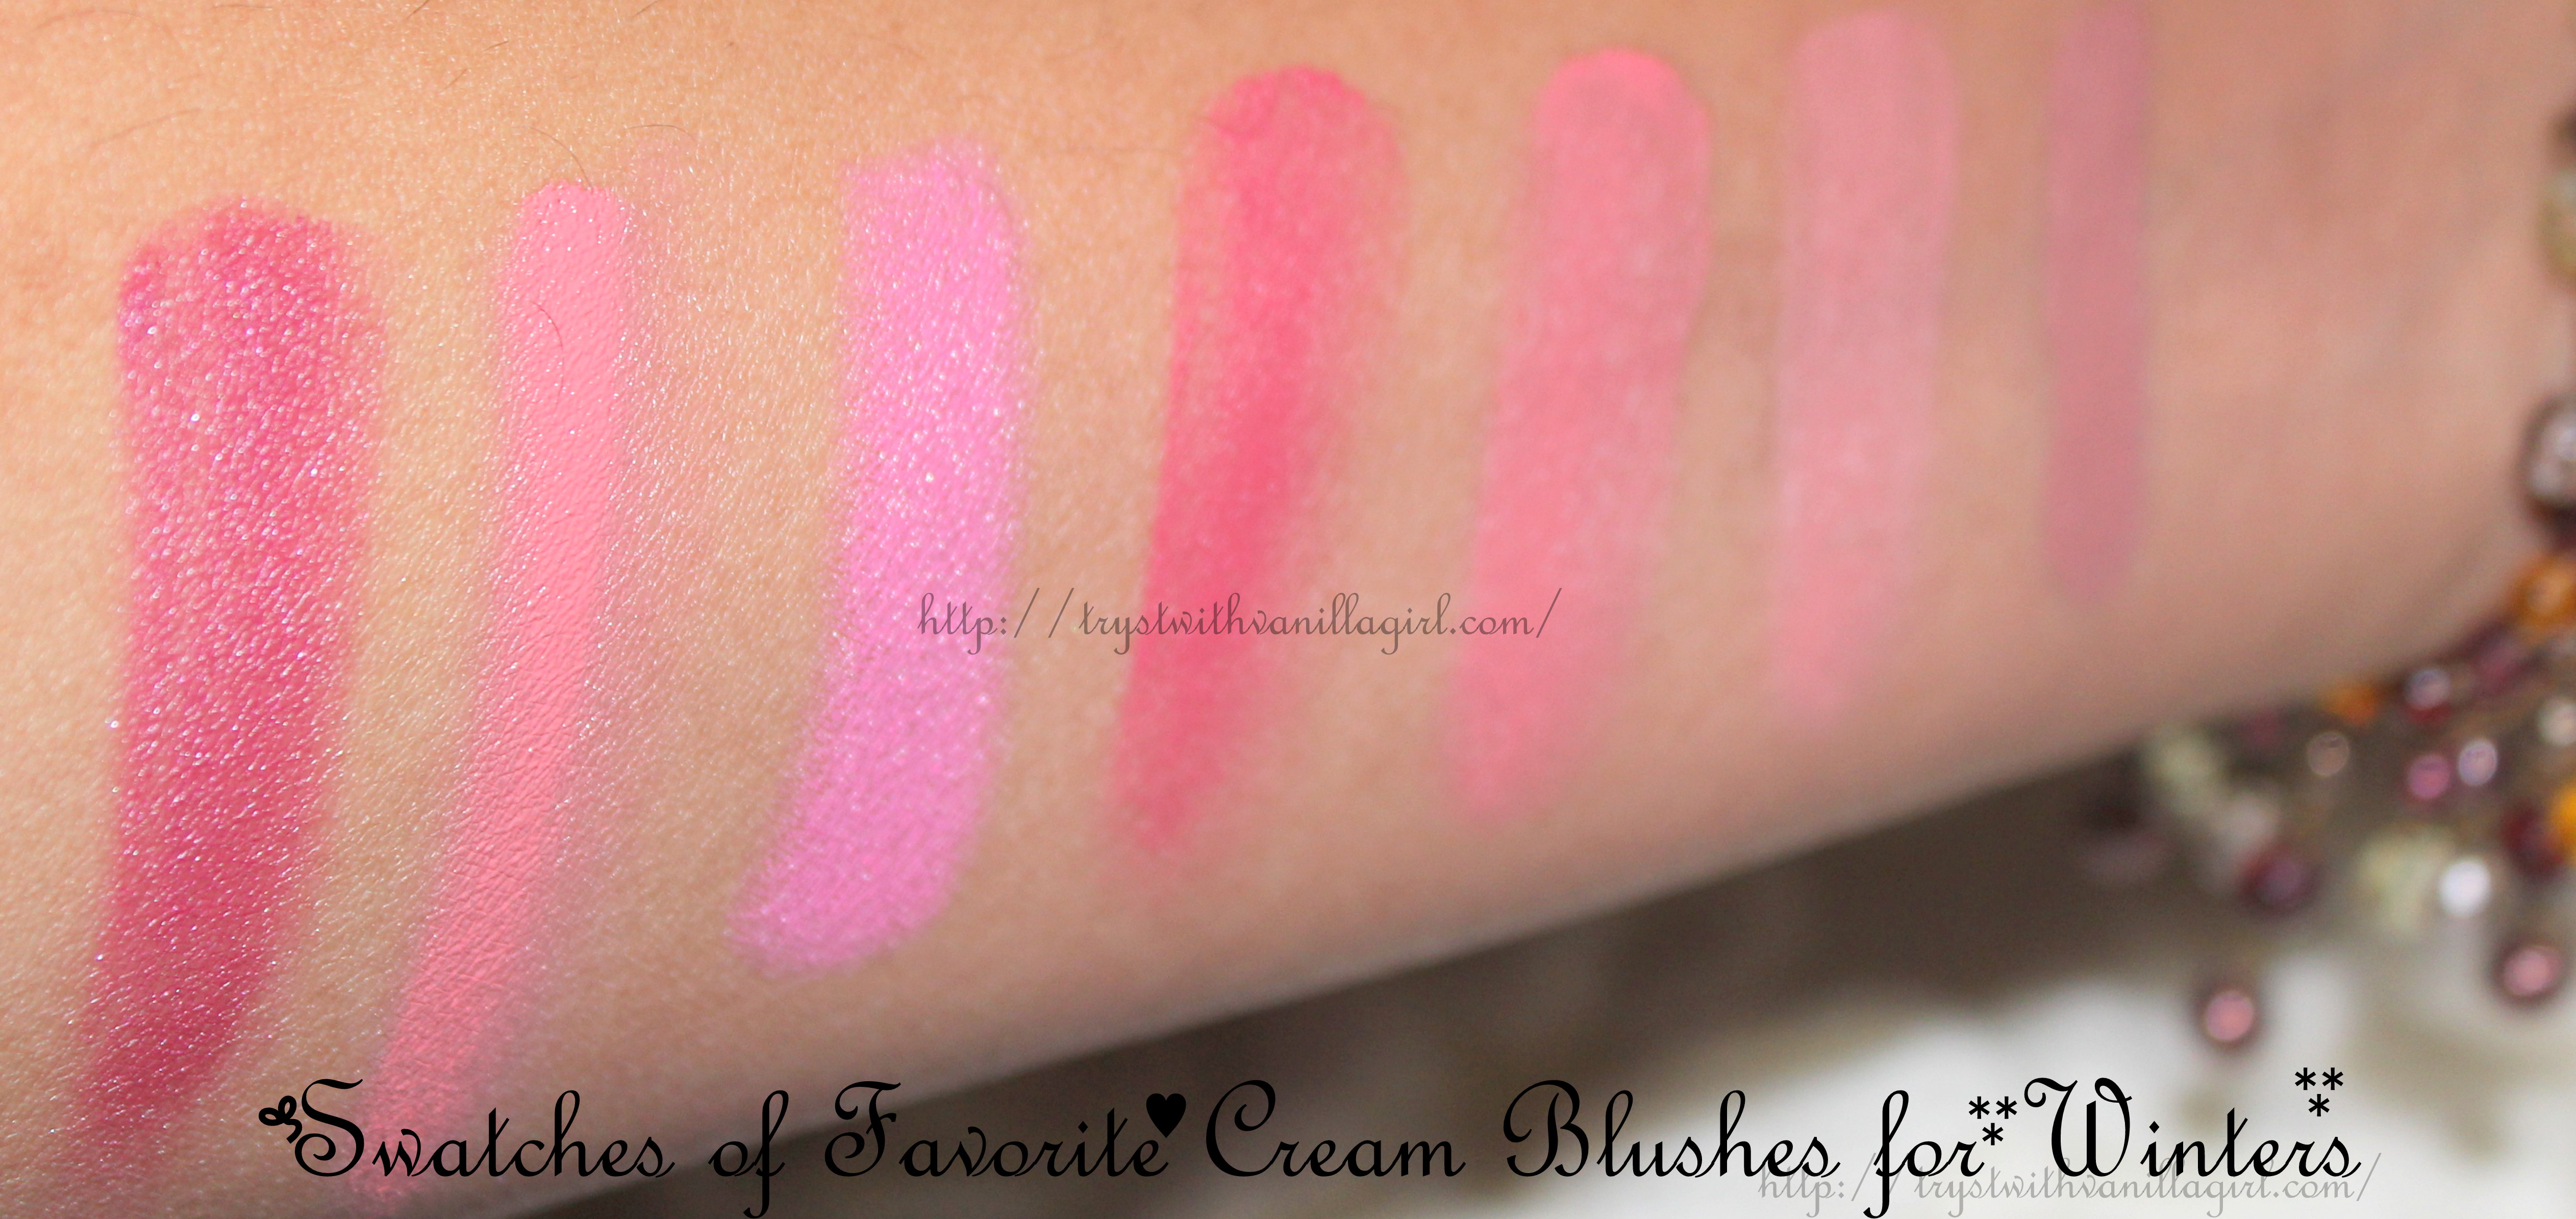 TOP FAVORITE CREAM BLUSHES,SWATCHES